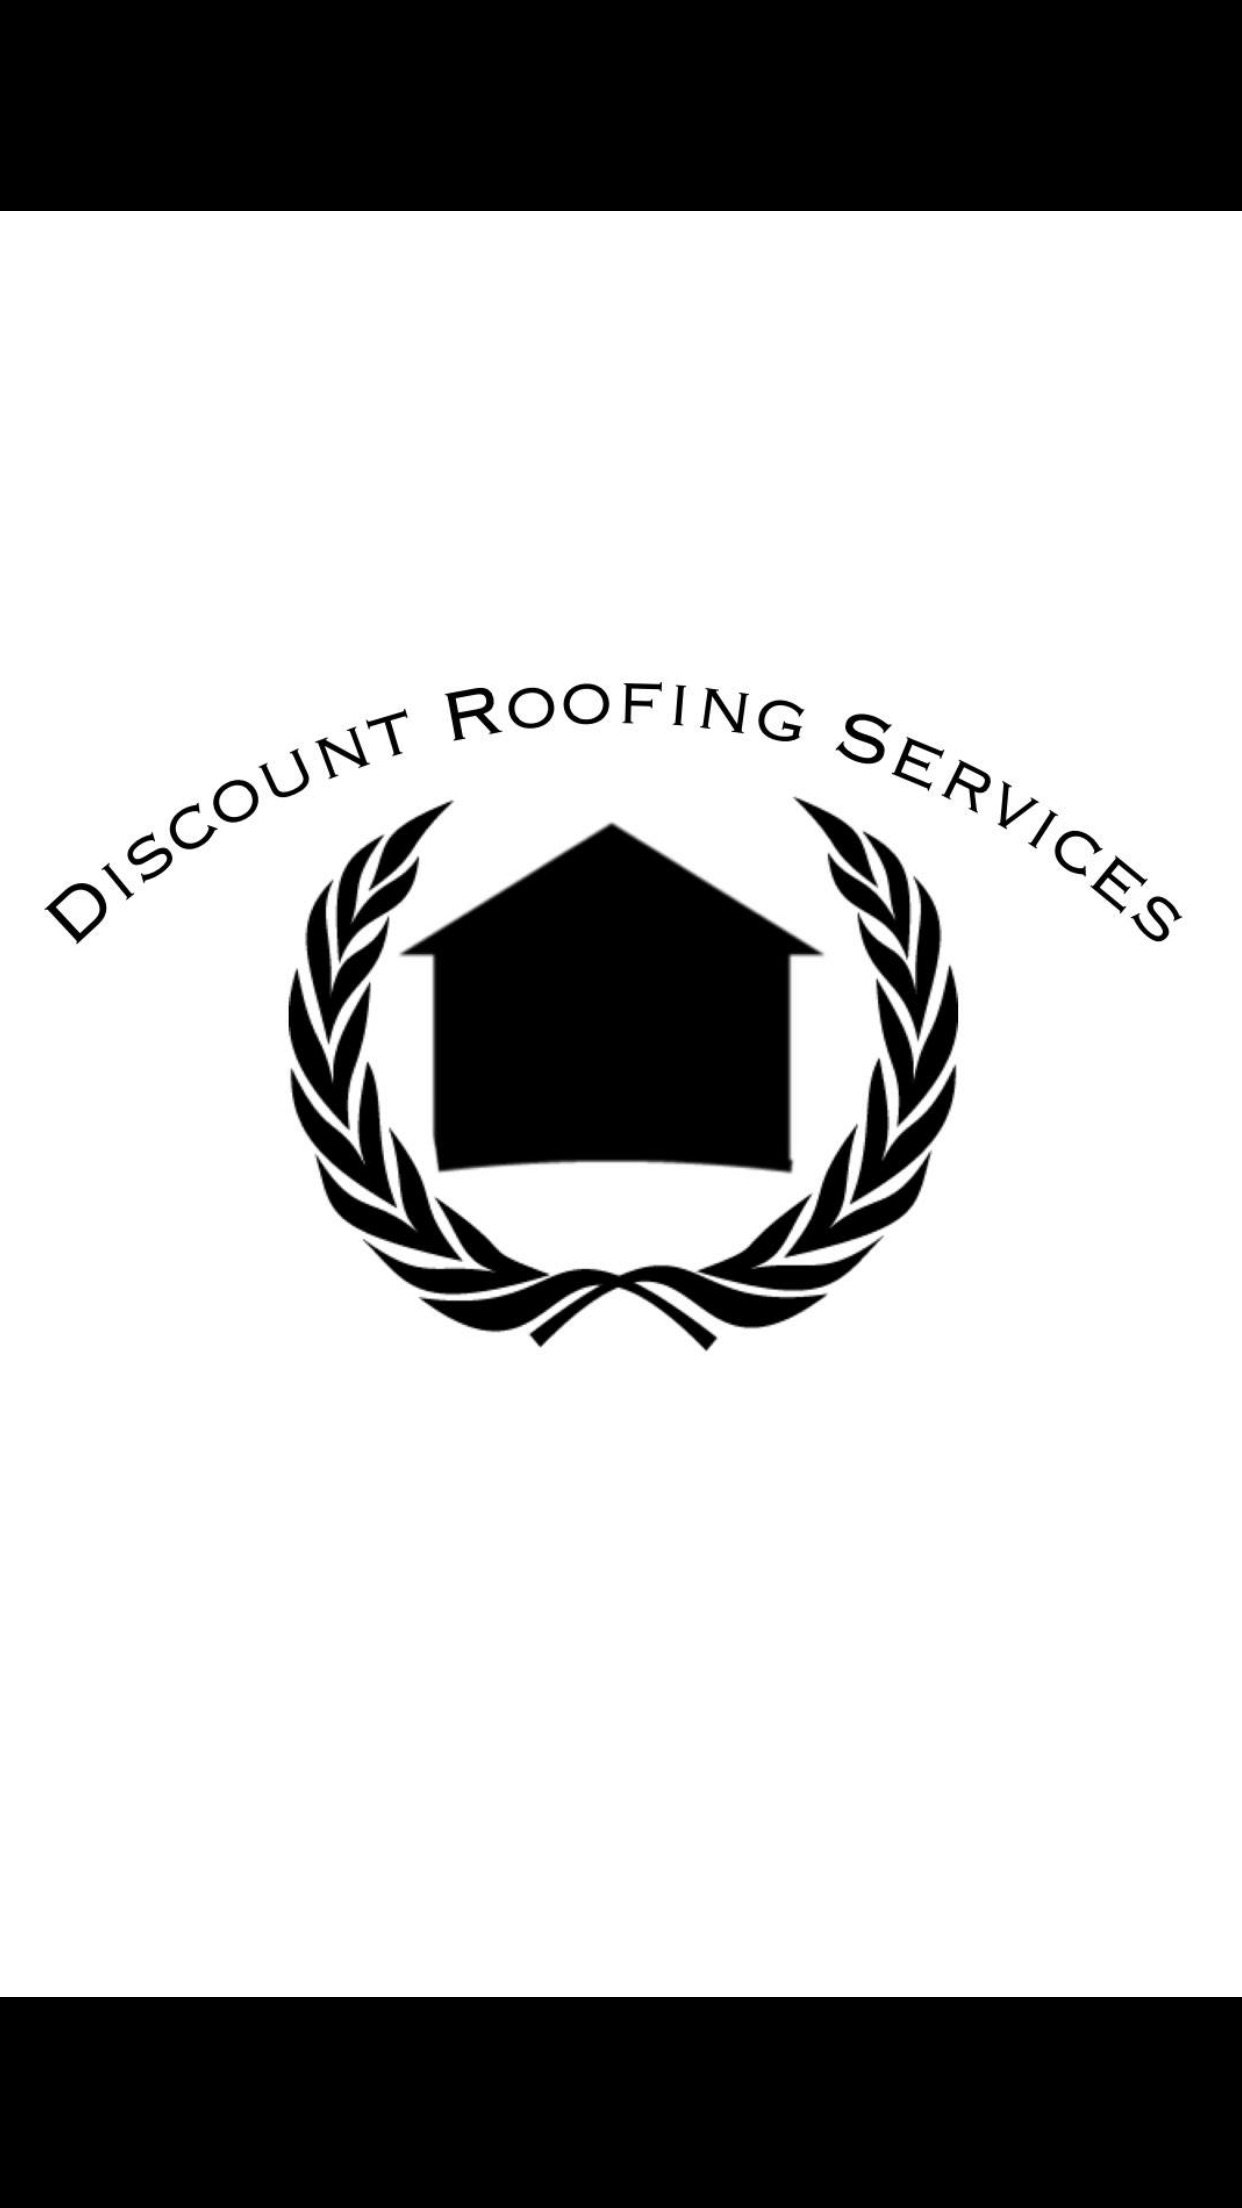 Discount Roofing Services Logo